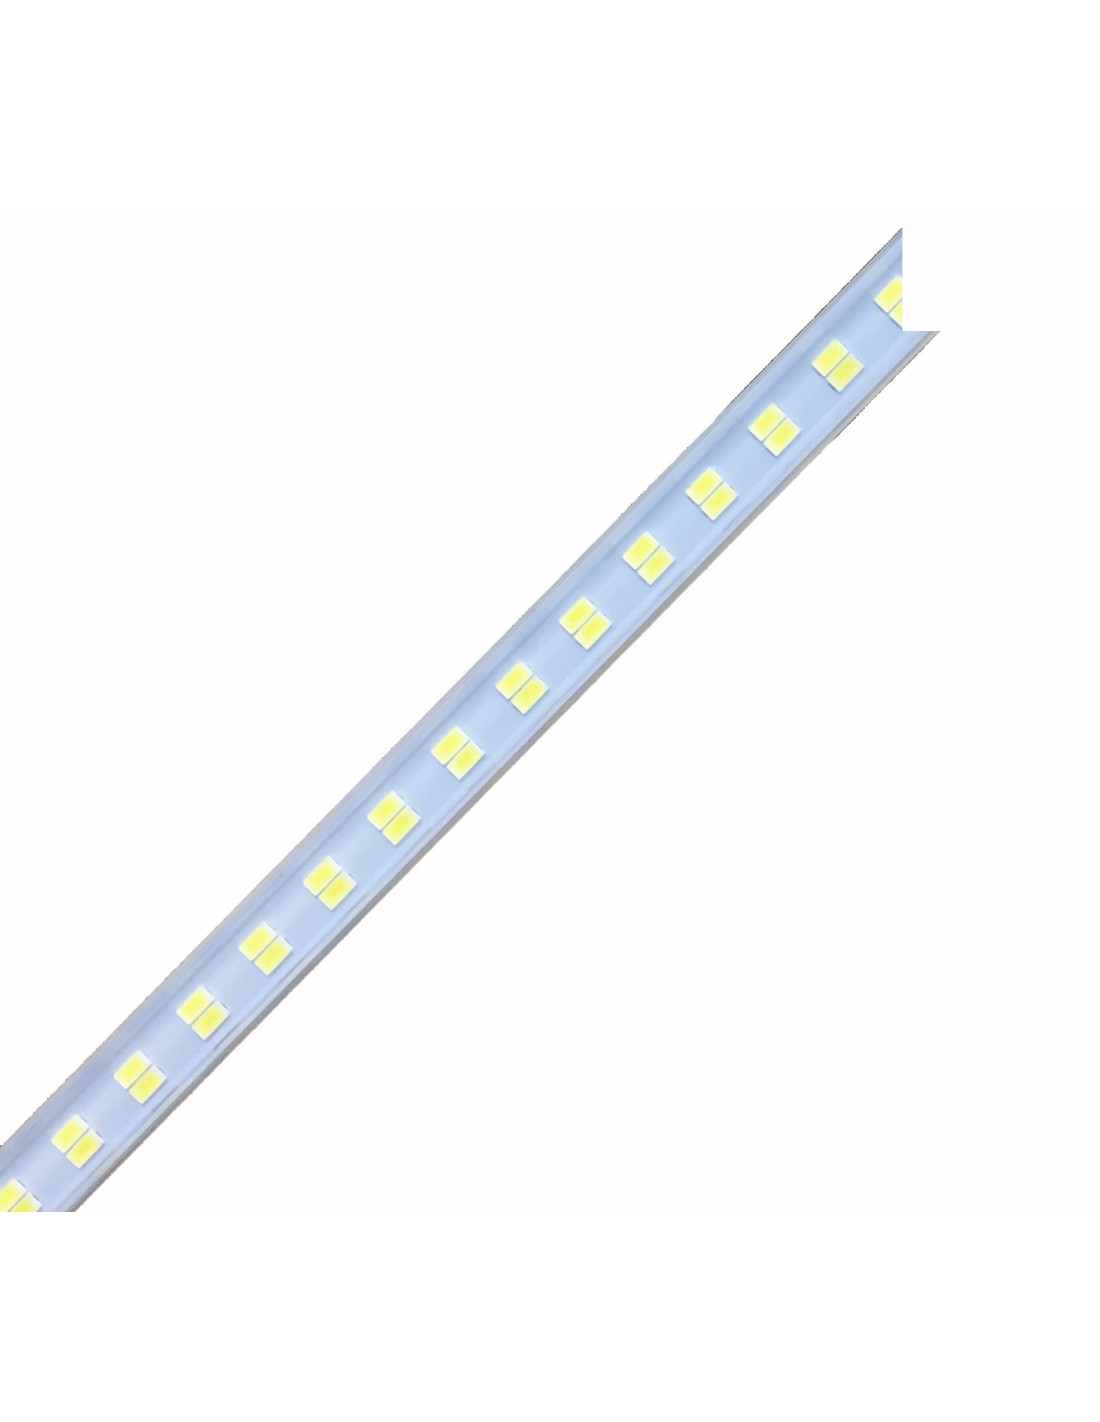 Led lighting -For mod. FESTIVAL-6 - available only with plexiglass service plan